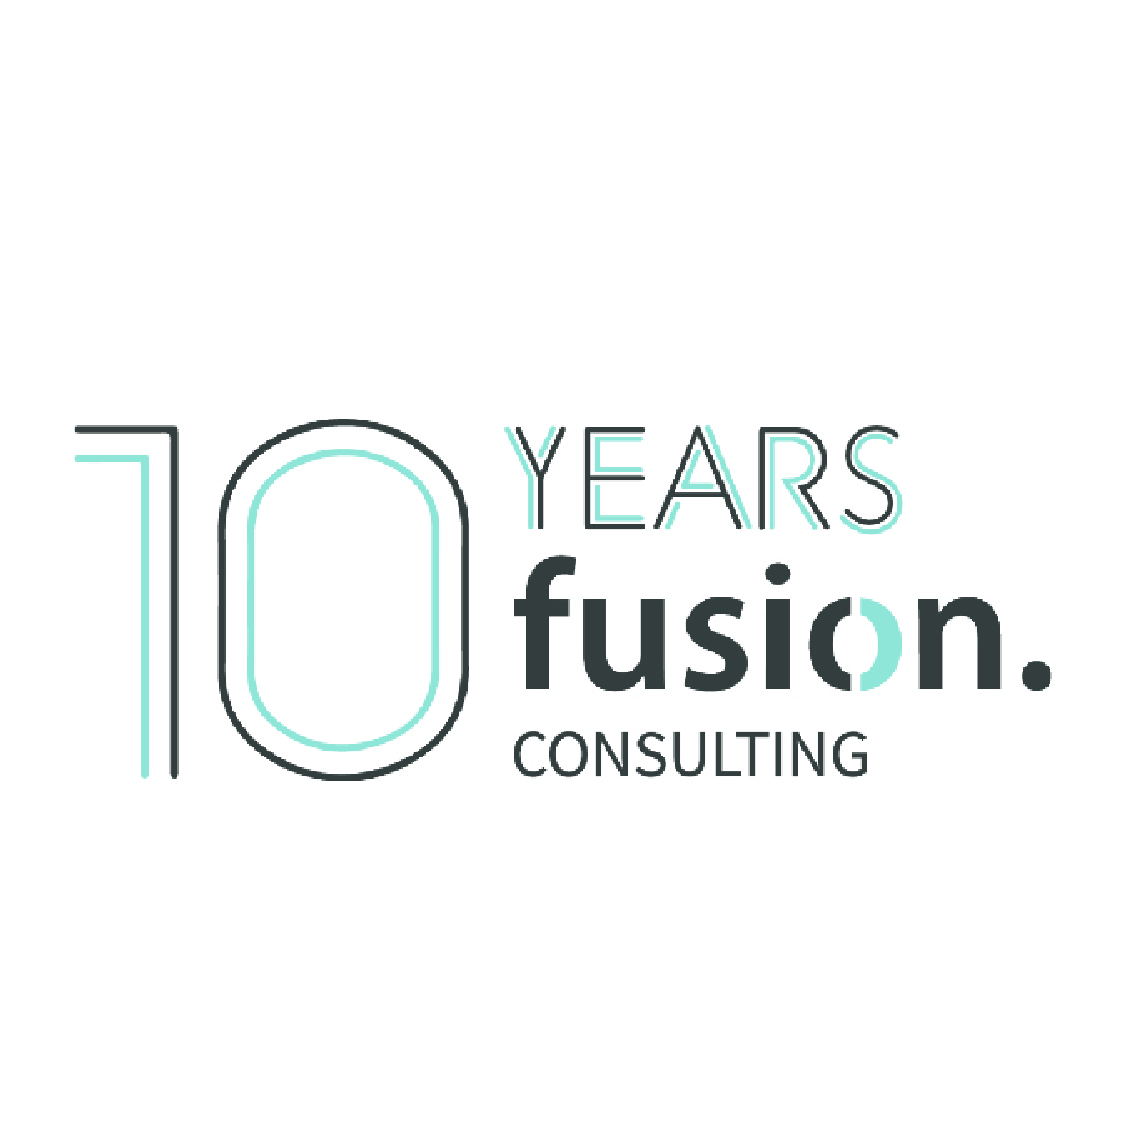 Fusion Consulting